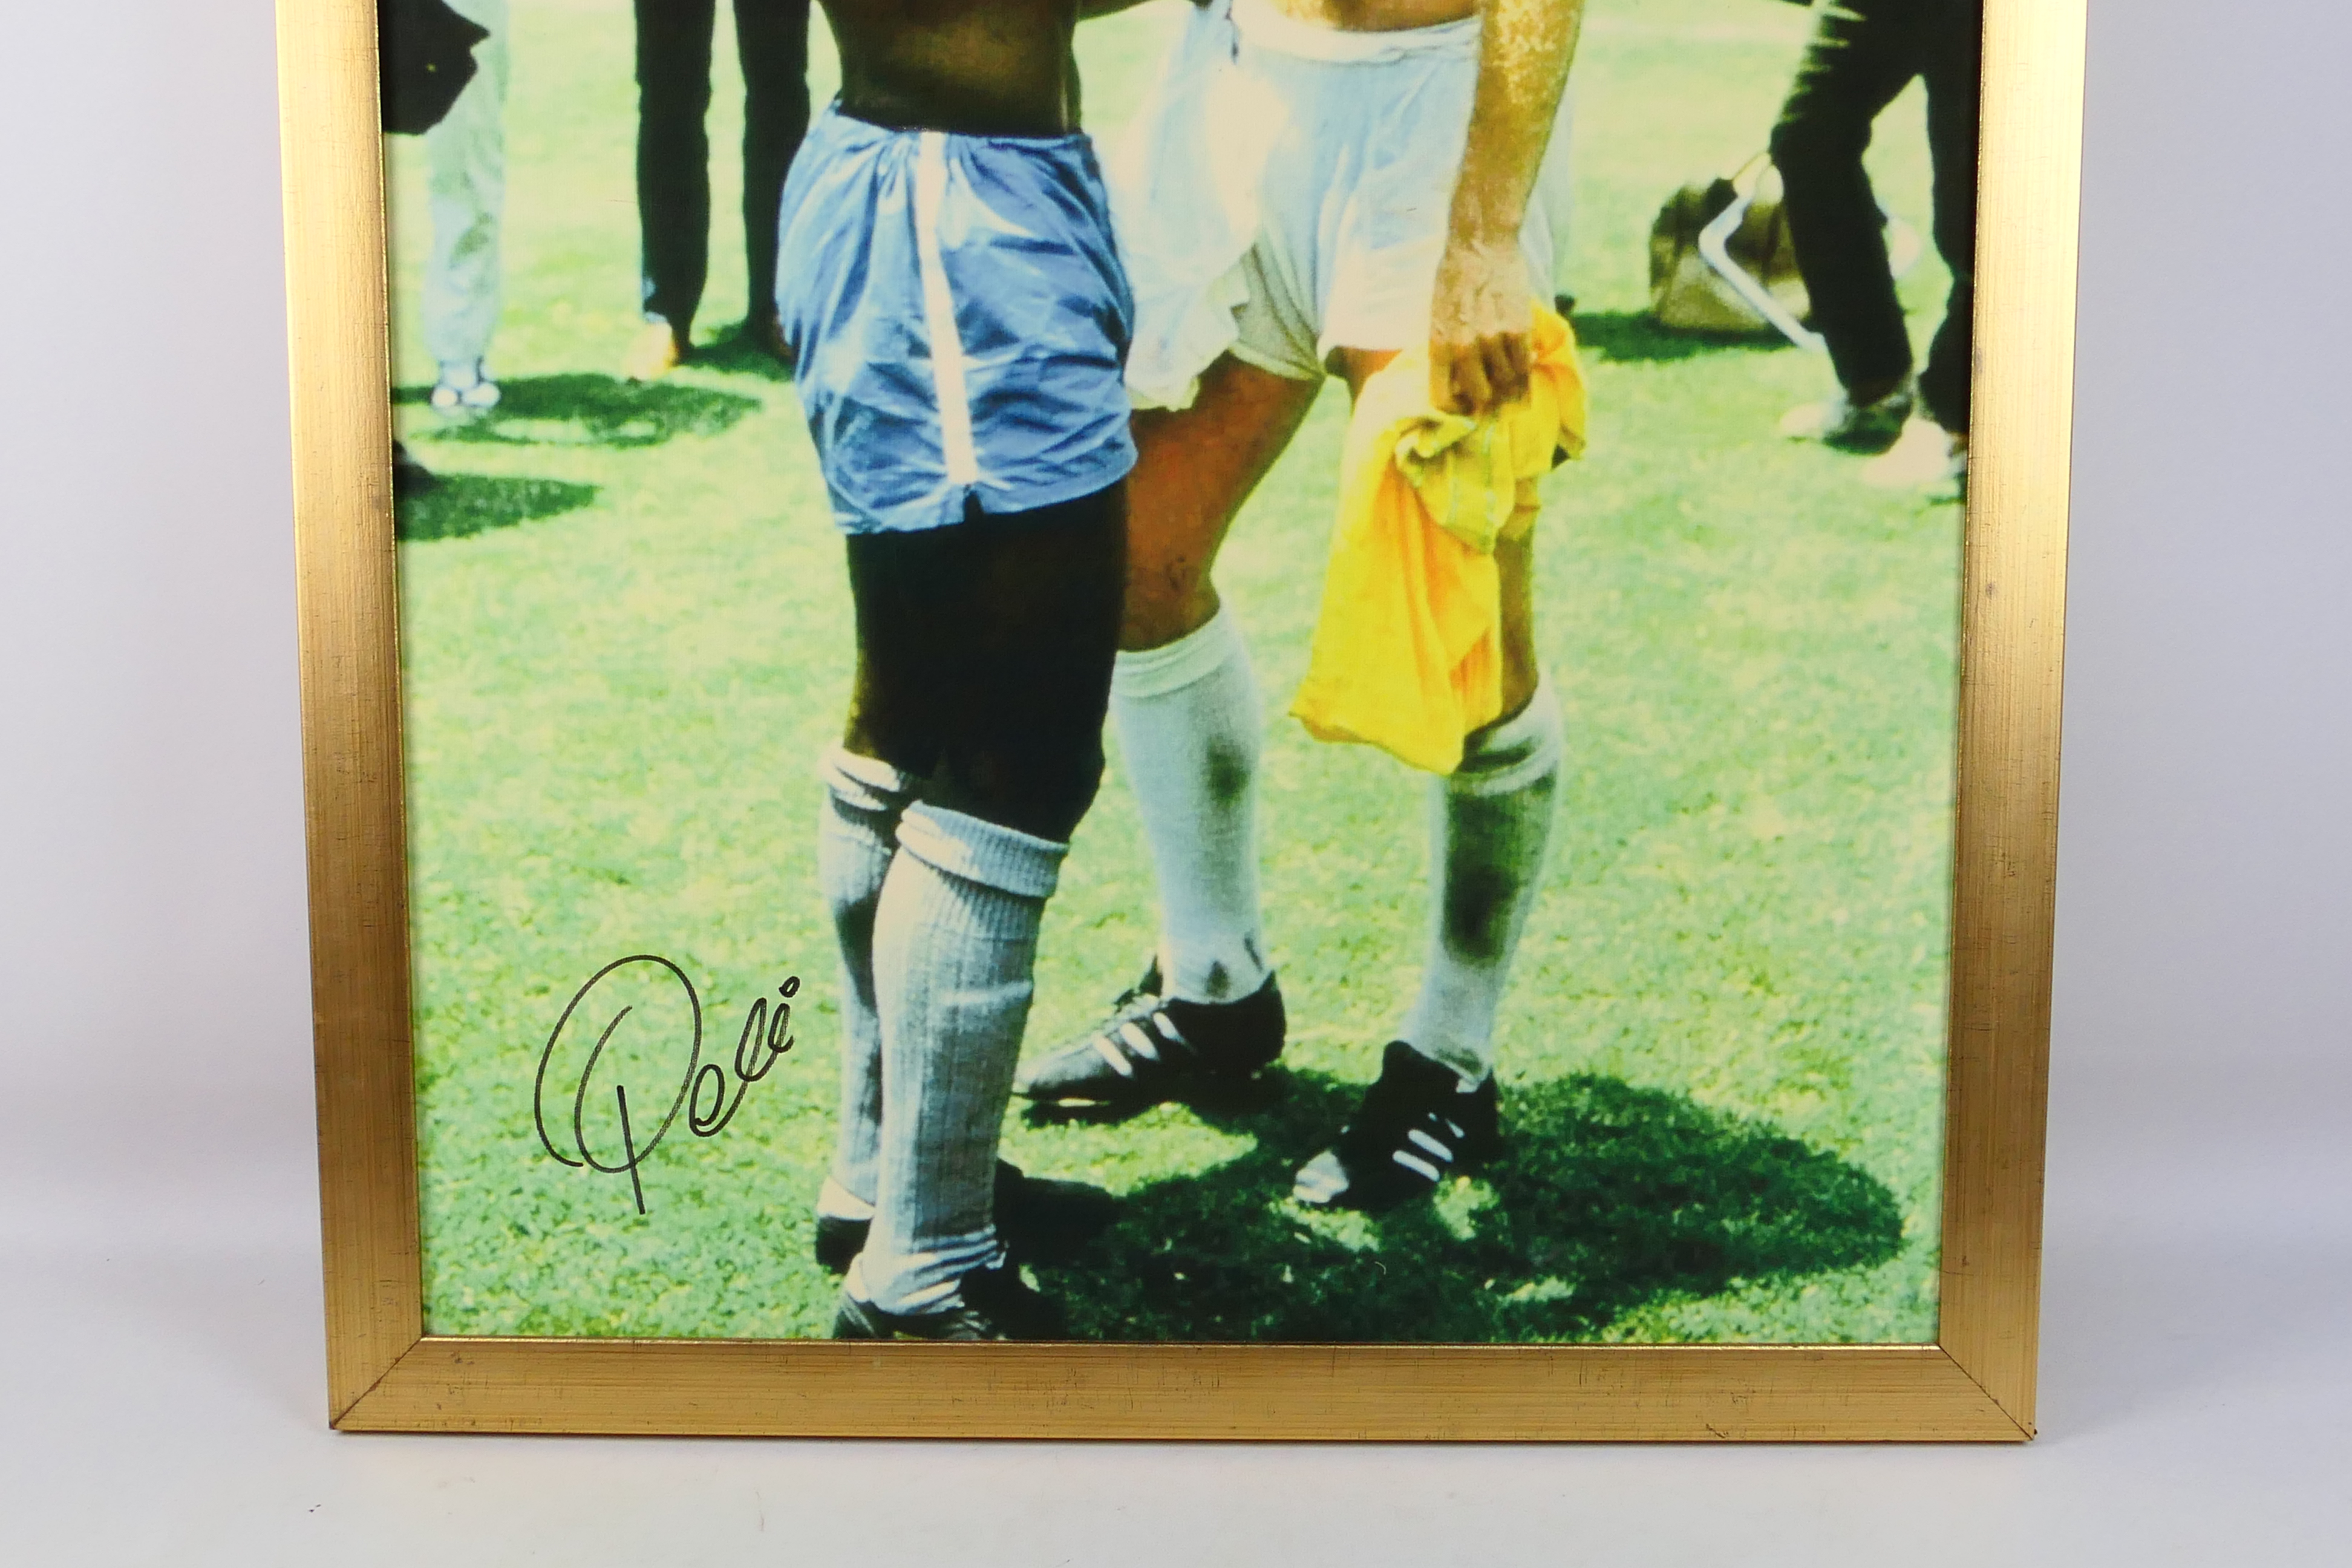 A Reproduction Canvas Print of Pele and Bobby Moore, hand signed by Pele, framed, 88cm by 61cm, - Image 3 of 5